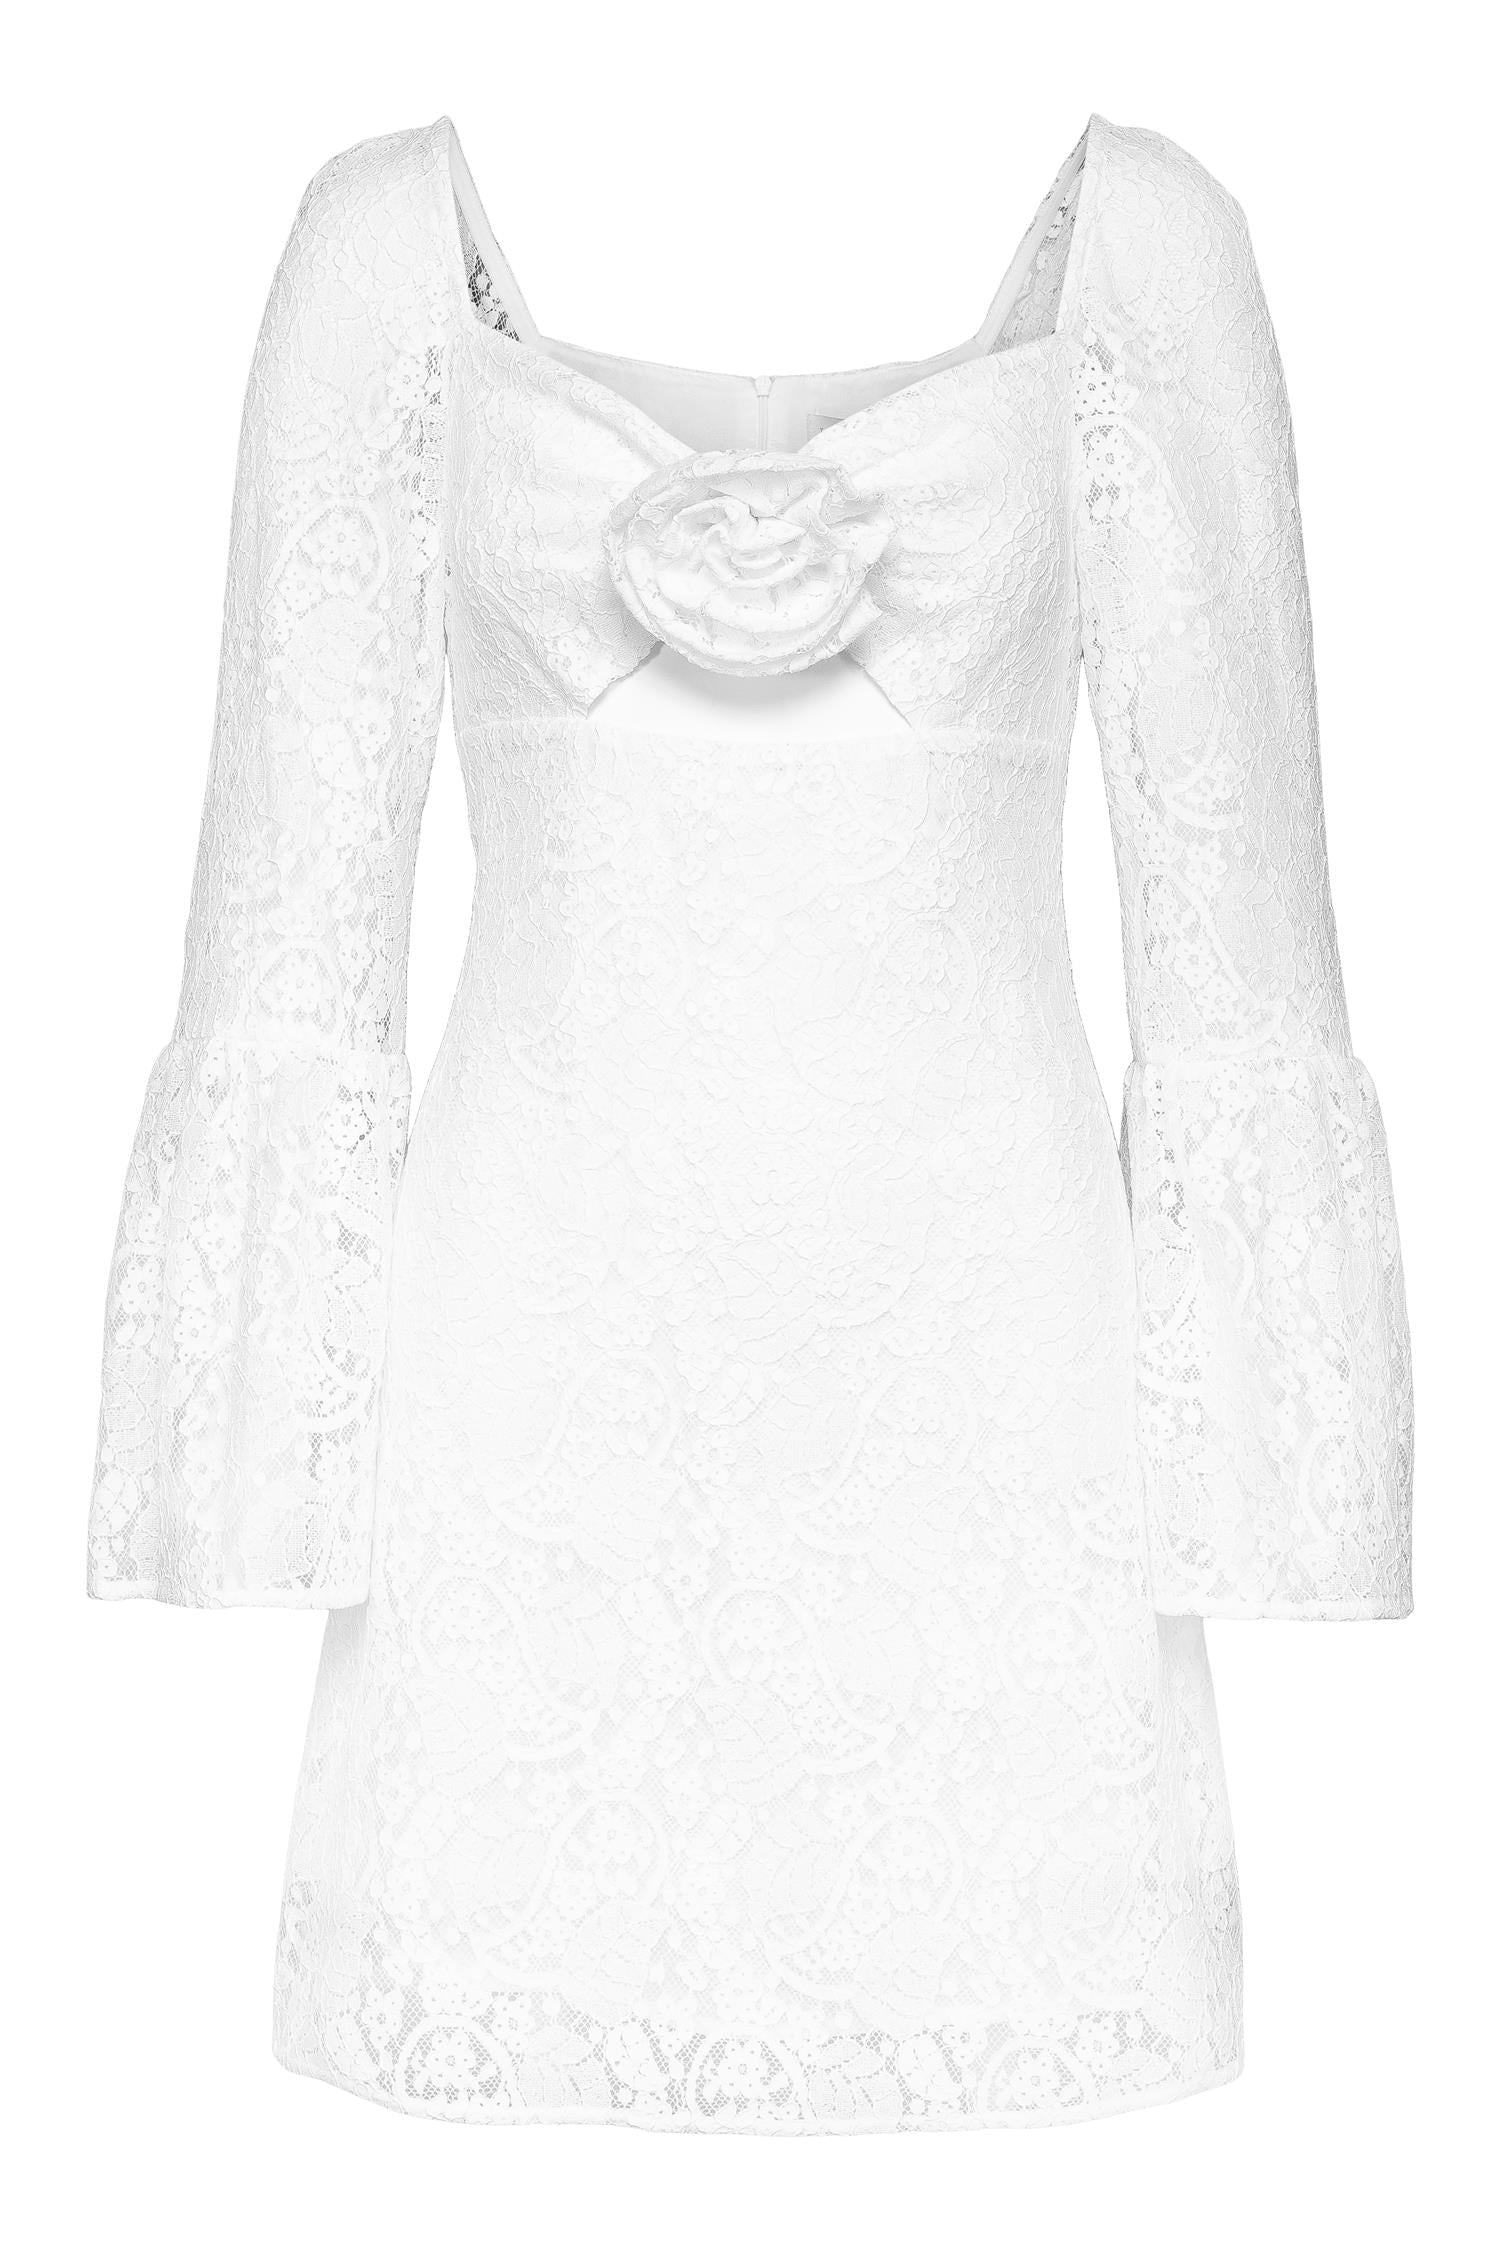 Brittany Dress White Lace